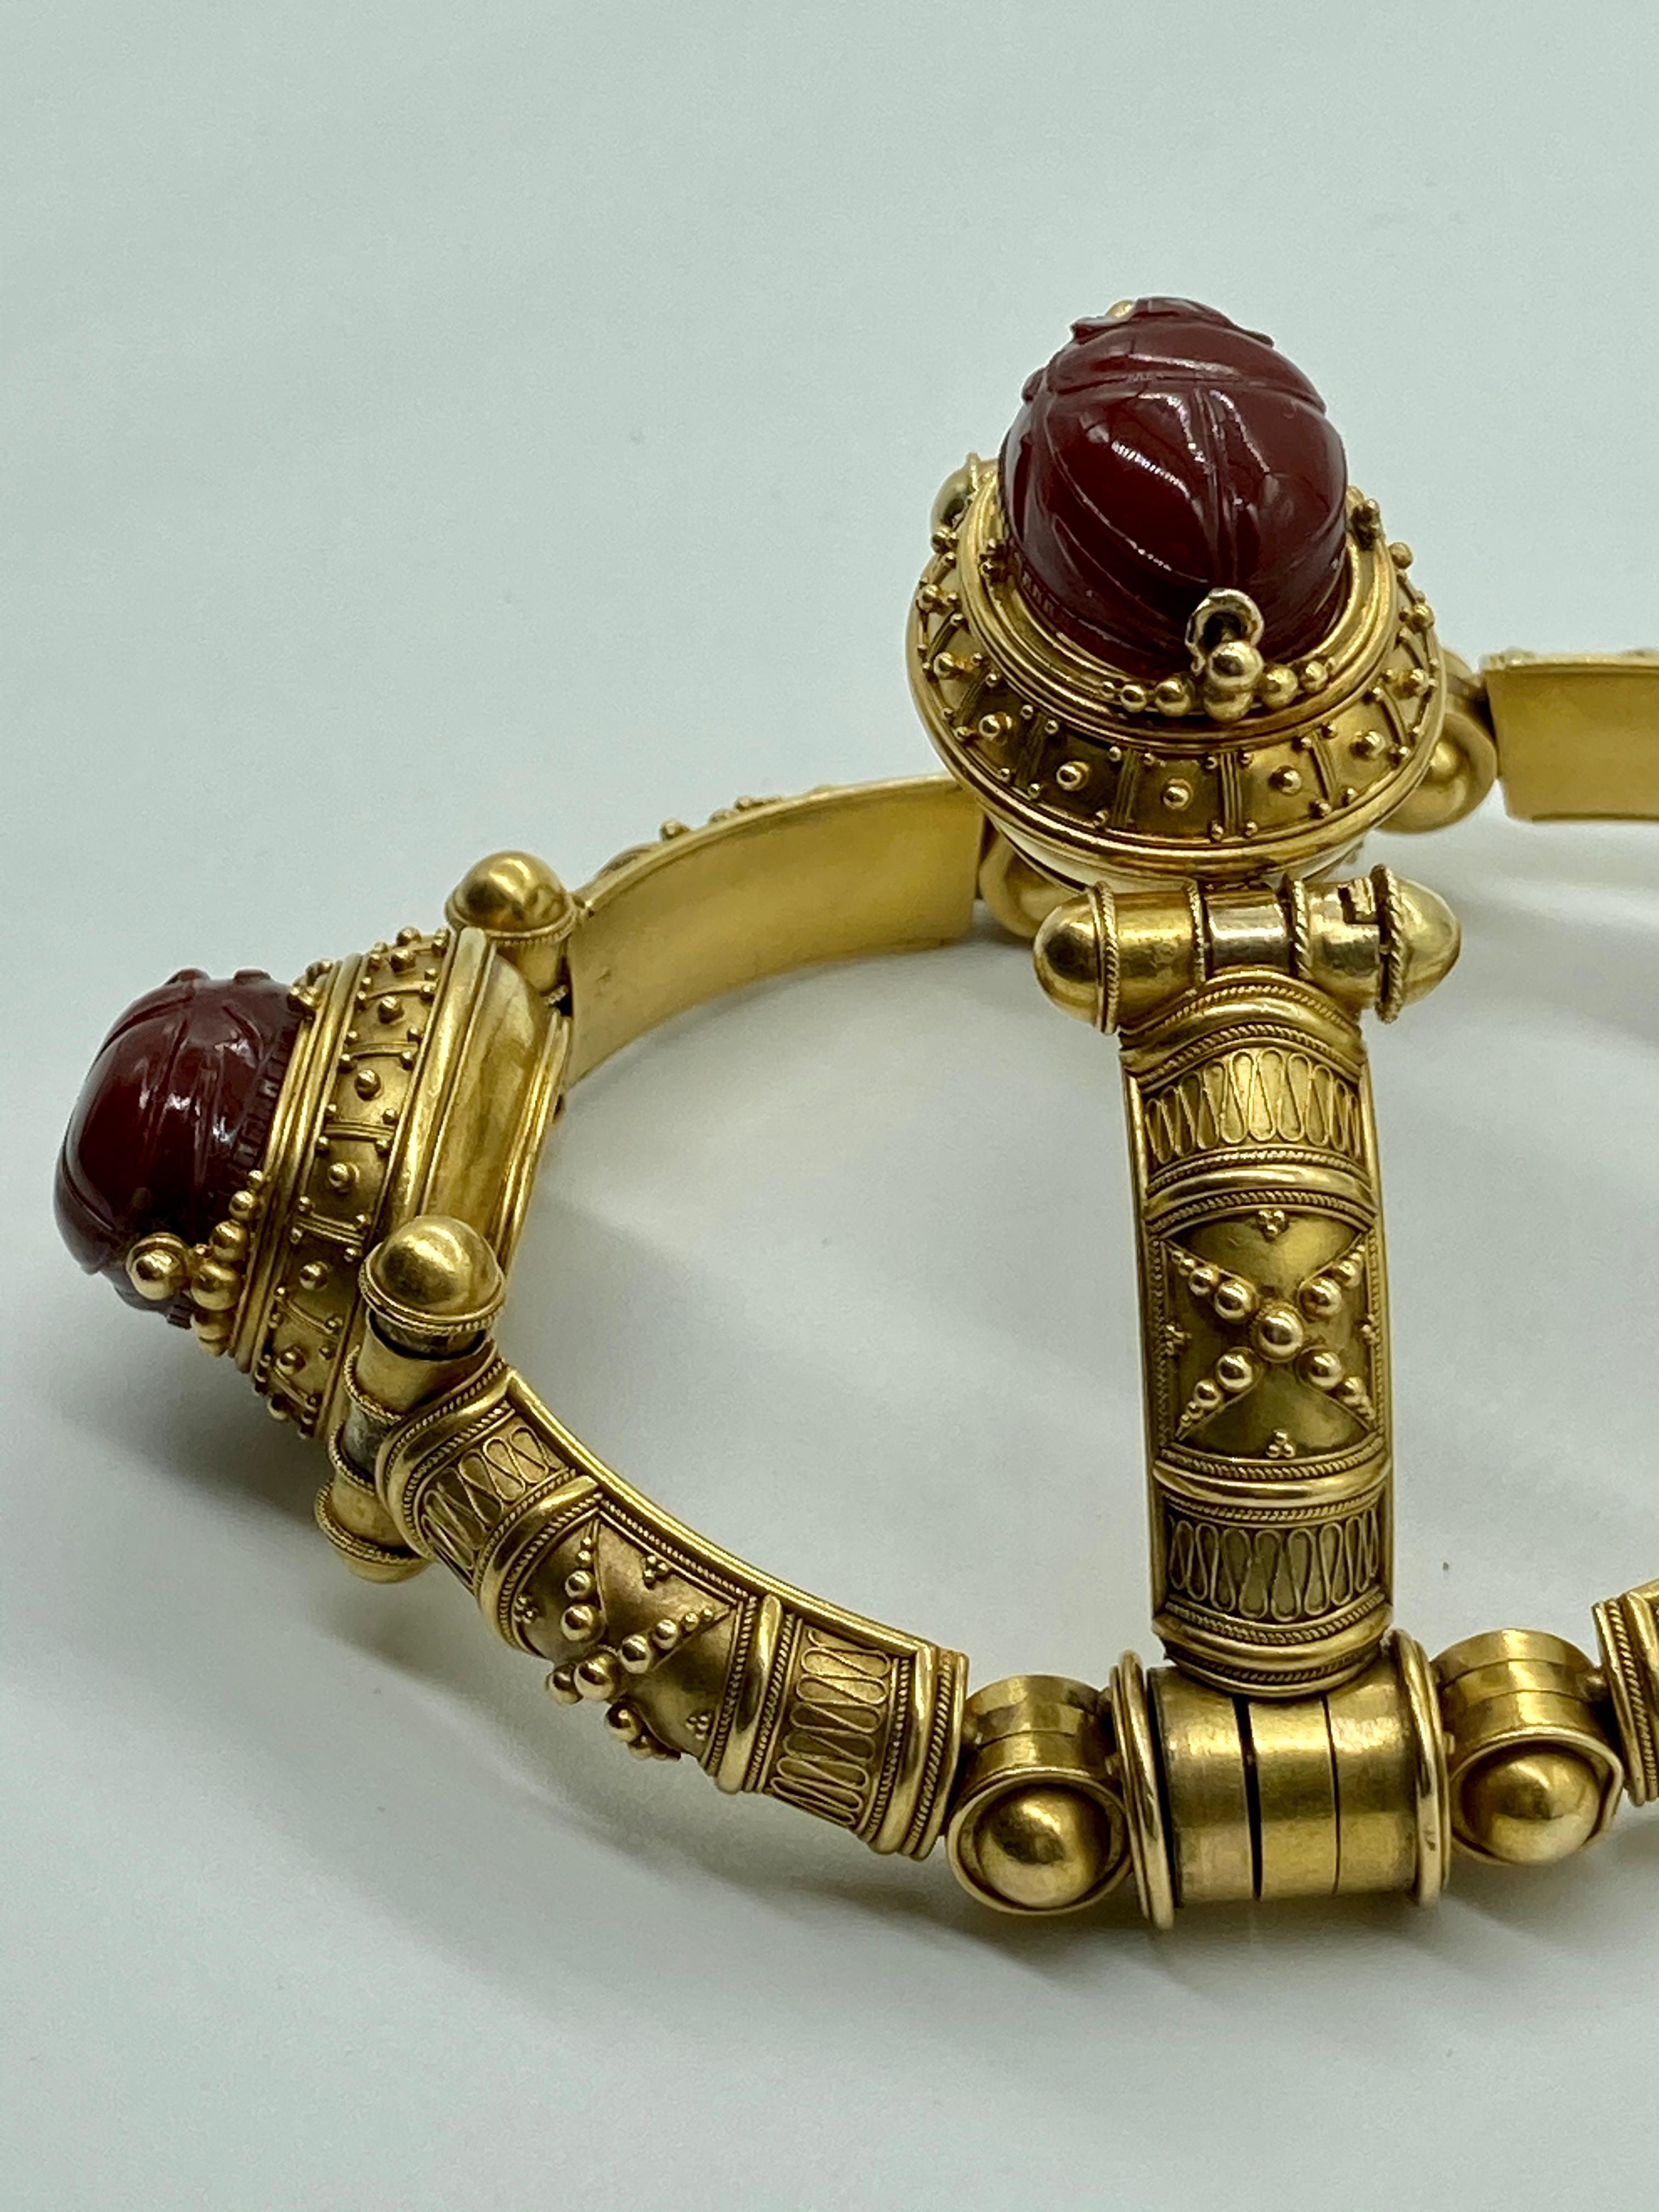 An antique Egyptian Revival bracelet circa 1870 by the Italian master jeweler Castellani. Featuring rotating carved carnelian scarabs with intaglios on their reverse and granulation detail on the 18 karat yellow gold body.